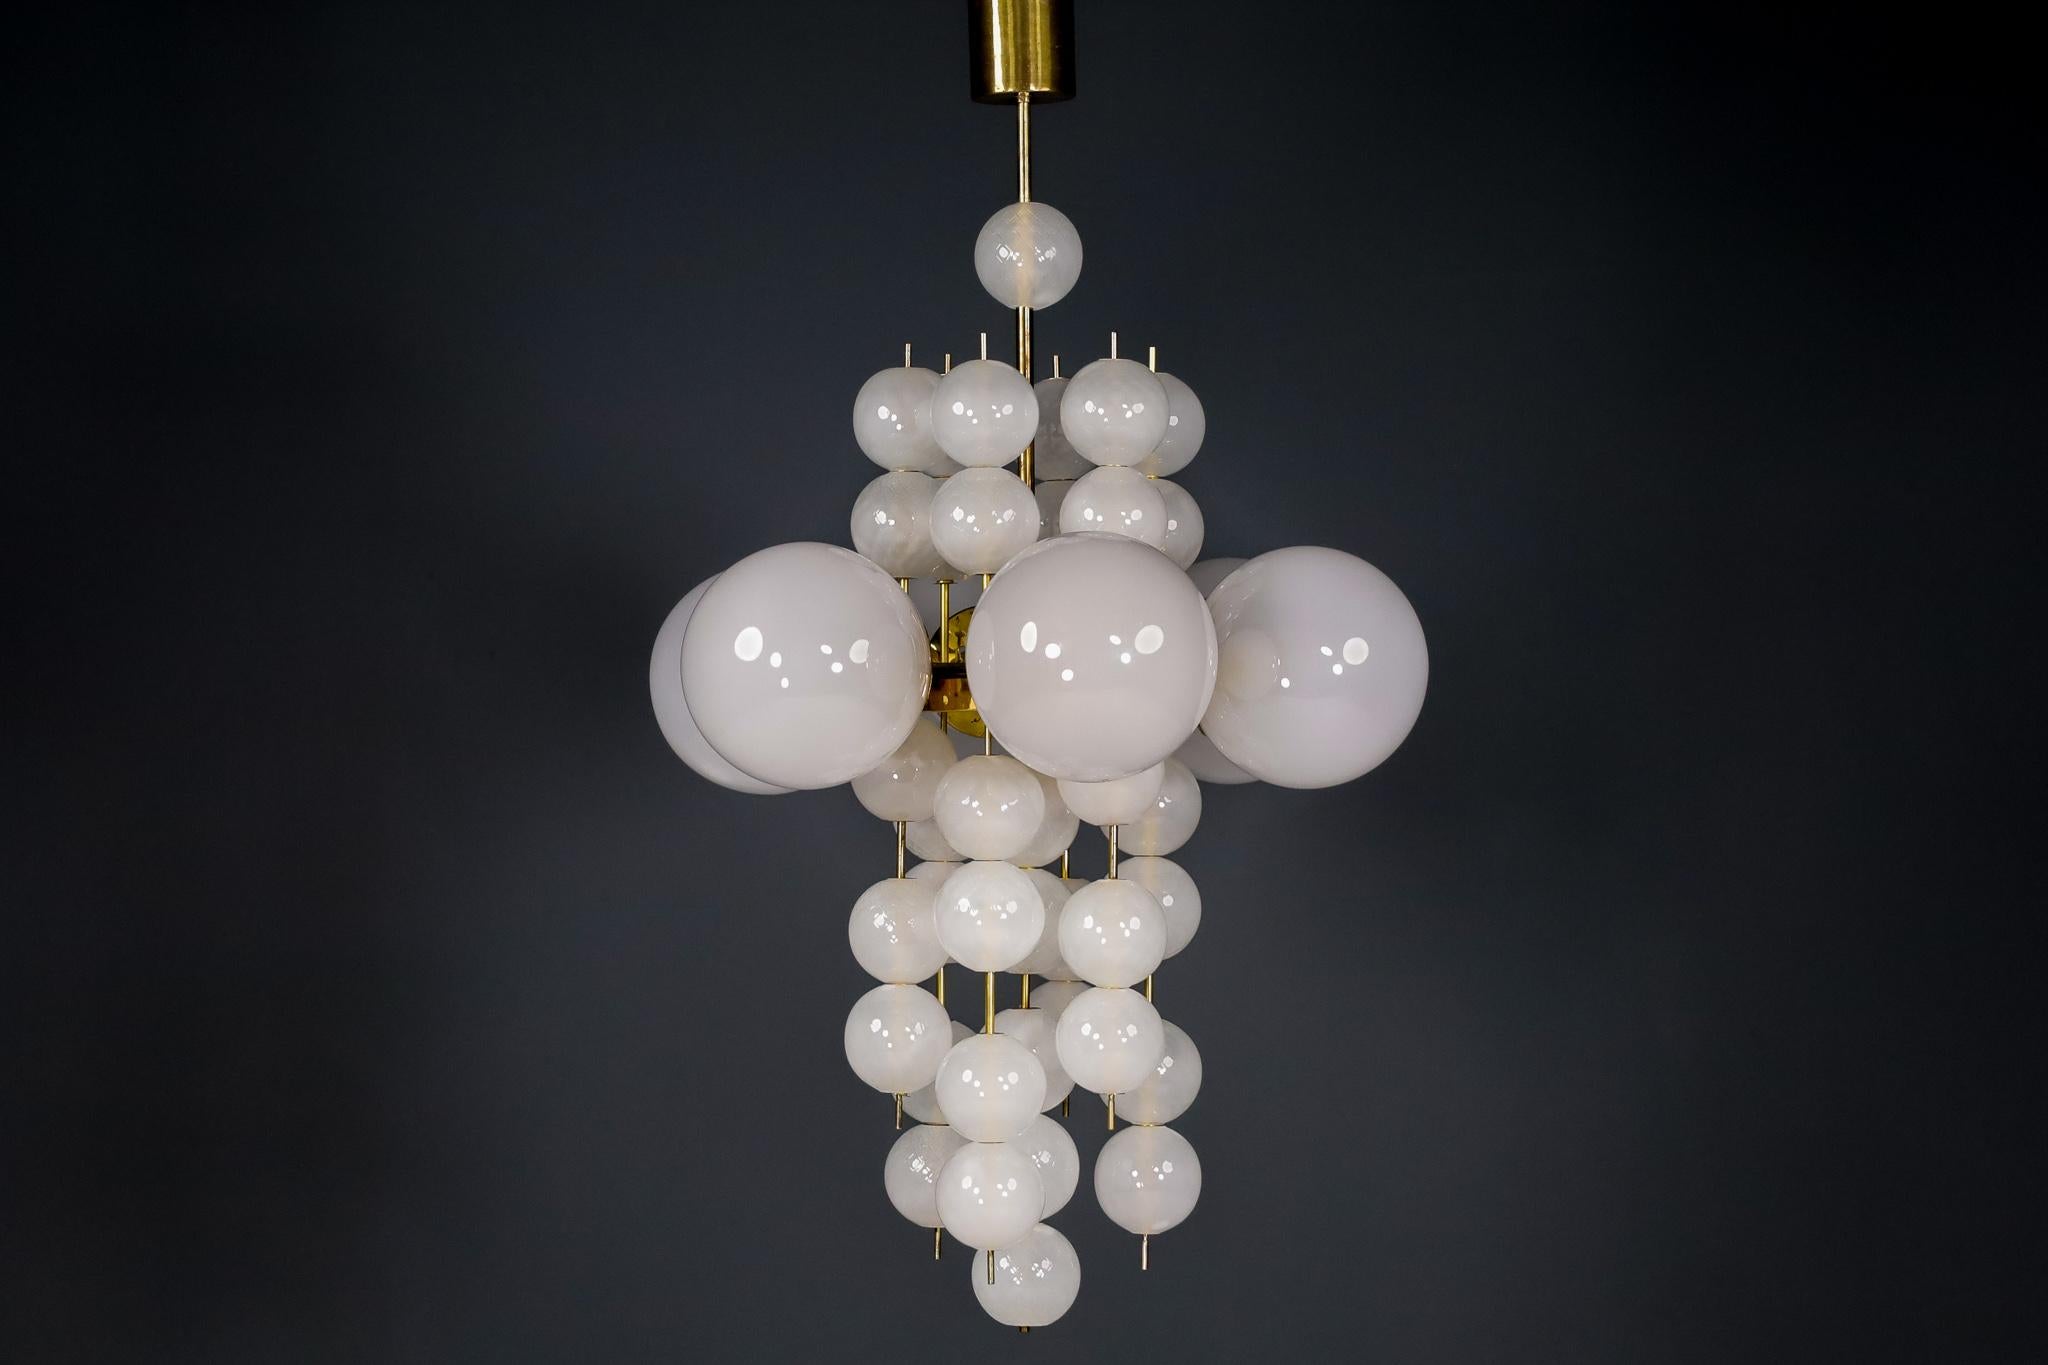 XL hotel chandelier with brass fixture and hand-blowed frosted glass globes by Preciosa, Czechia.

Large hotel chandelier with brass fixture produced and designed in Czechia by the famous Preciosa Factory. Total 6 large hand blowed frosted glass